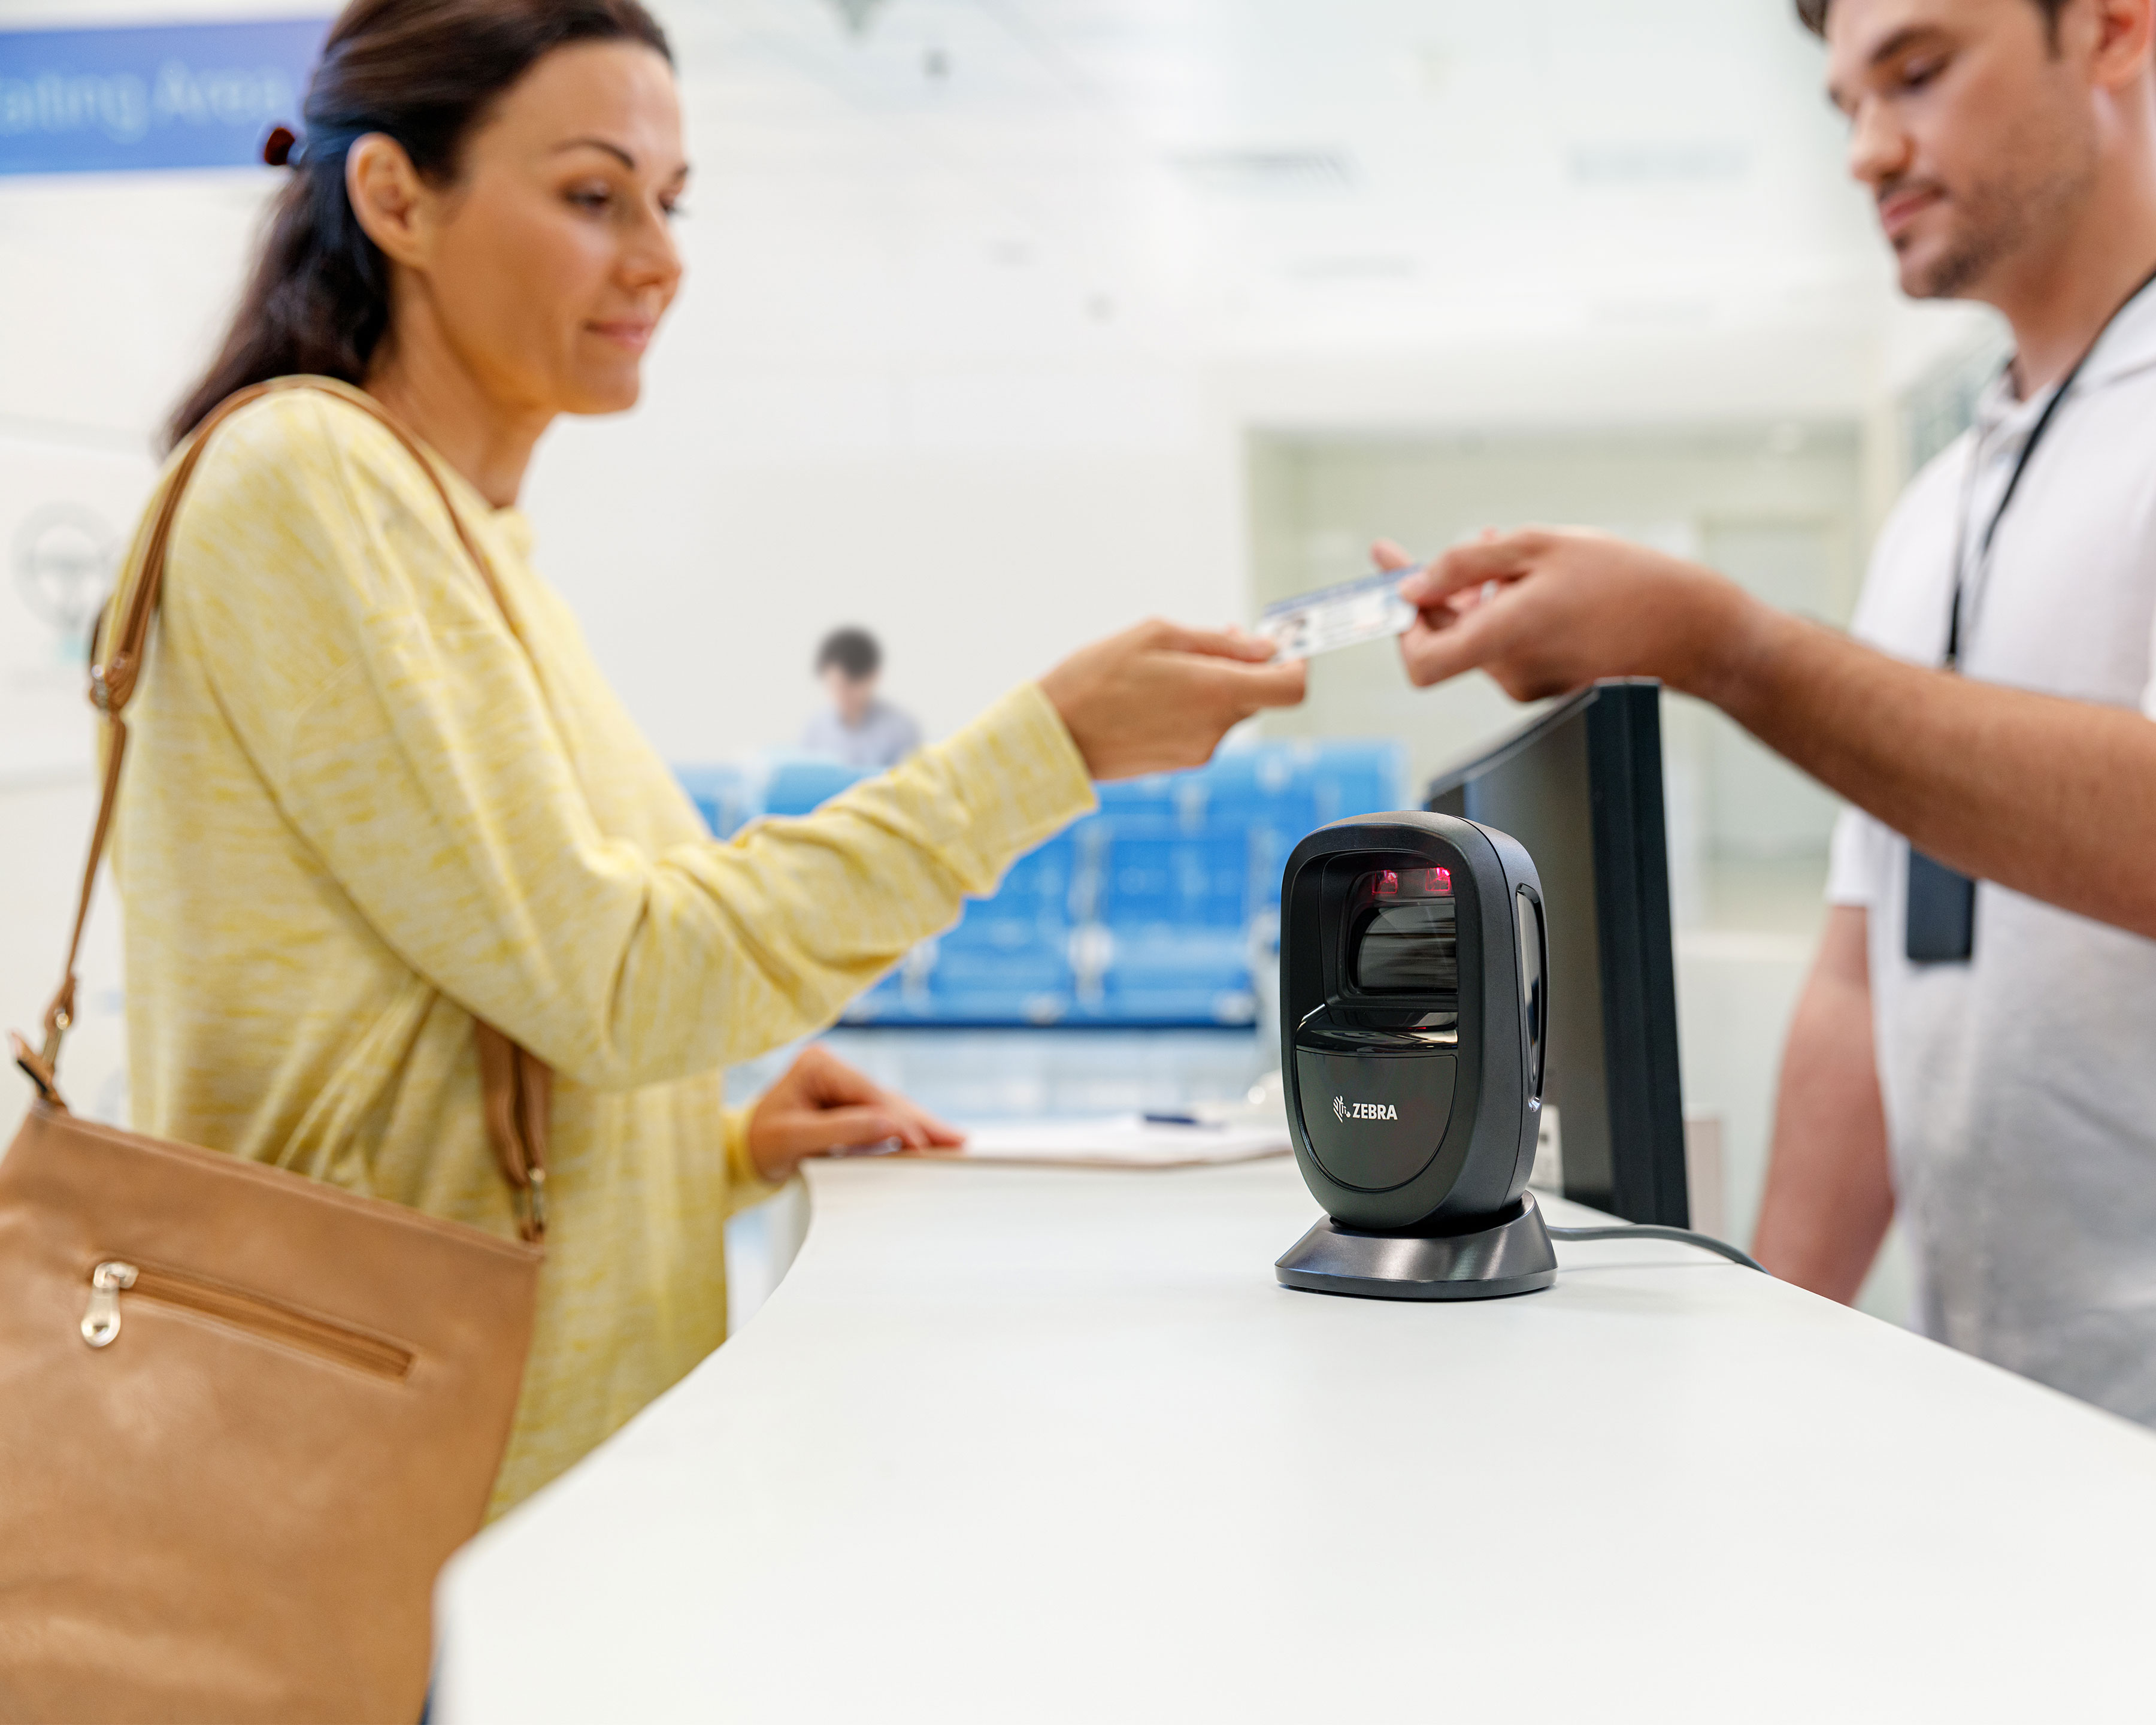 Zebra DS9300 hands free barcode scanner sits on counter as woman hands her driver's license to a DMV employee